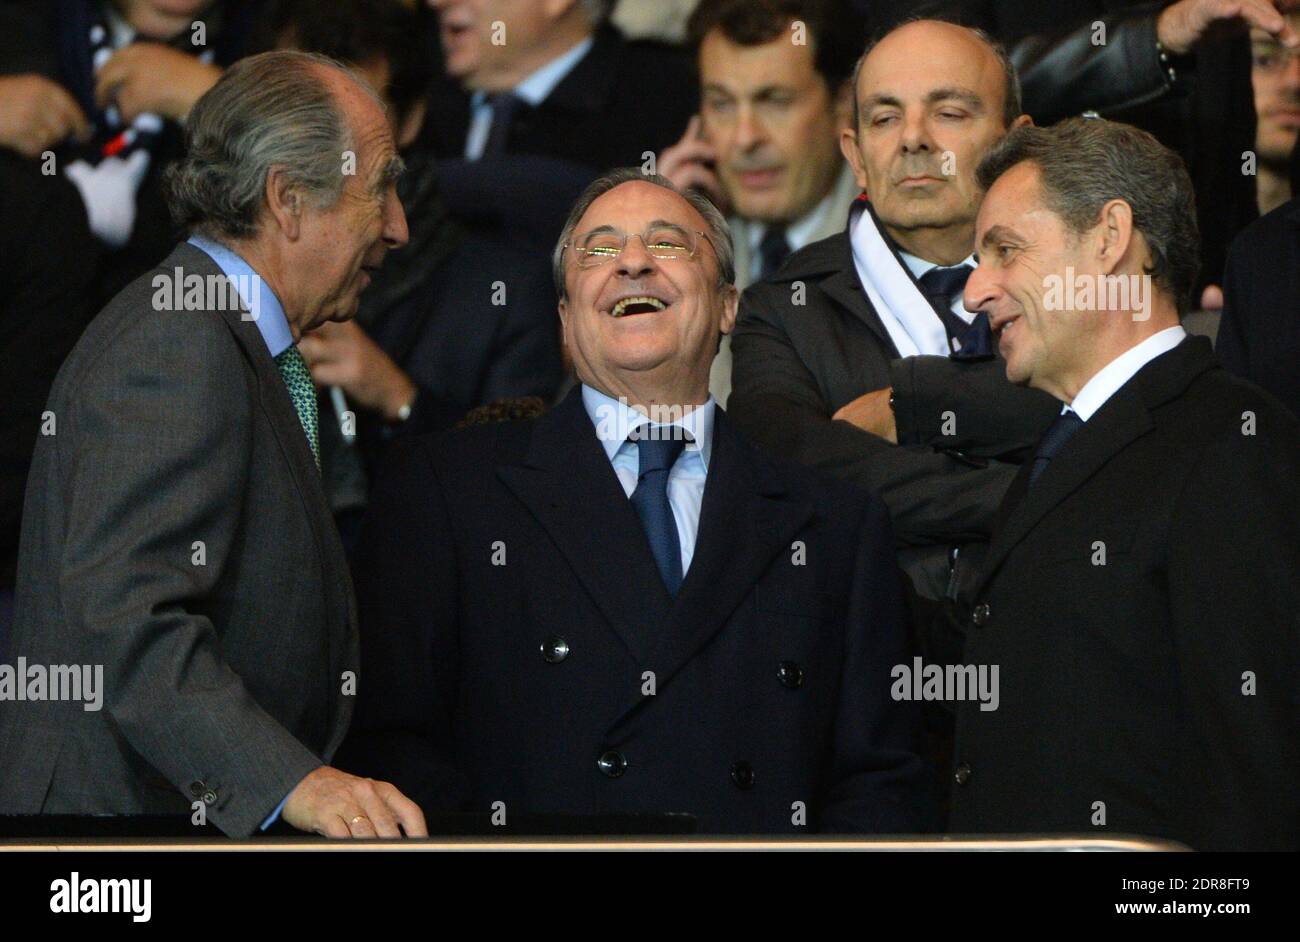 Real Madrid's President Florentino Perez and Nicolas Sarkozy during the UEFA Champions League soccer match, Group A, Paris Saint-Germain (PSG) Vs Real Madrid CF at Parc des Princes stadium in Paris, France on October 21, 2015. Photo by Christian Liewig/ABACAPRESS.COM Stock Photo